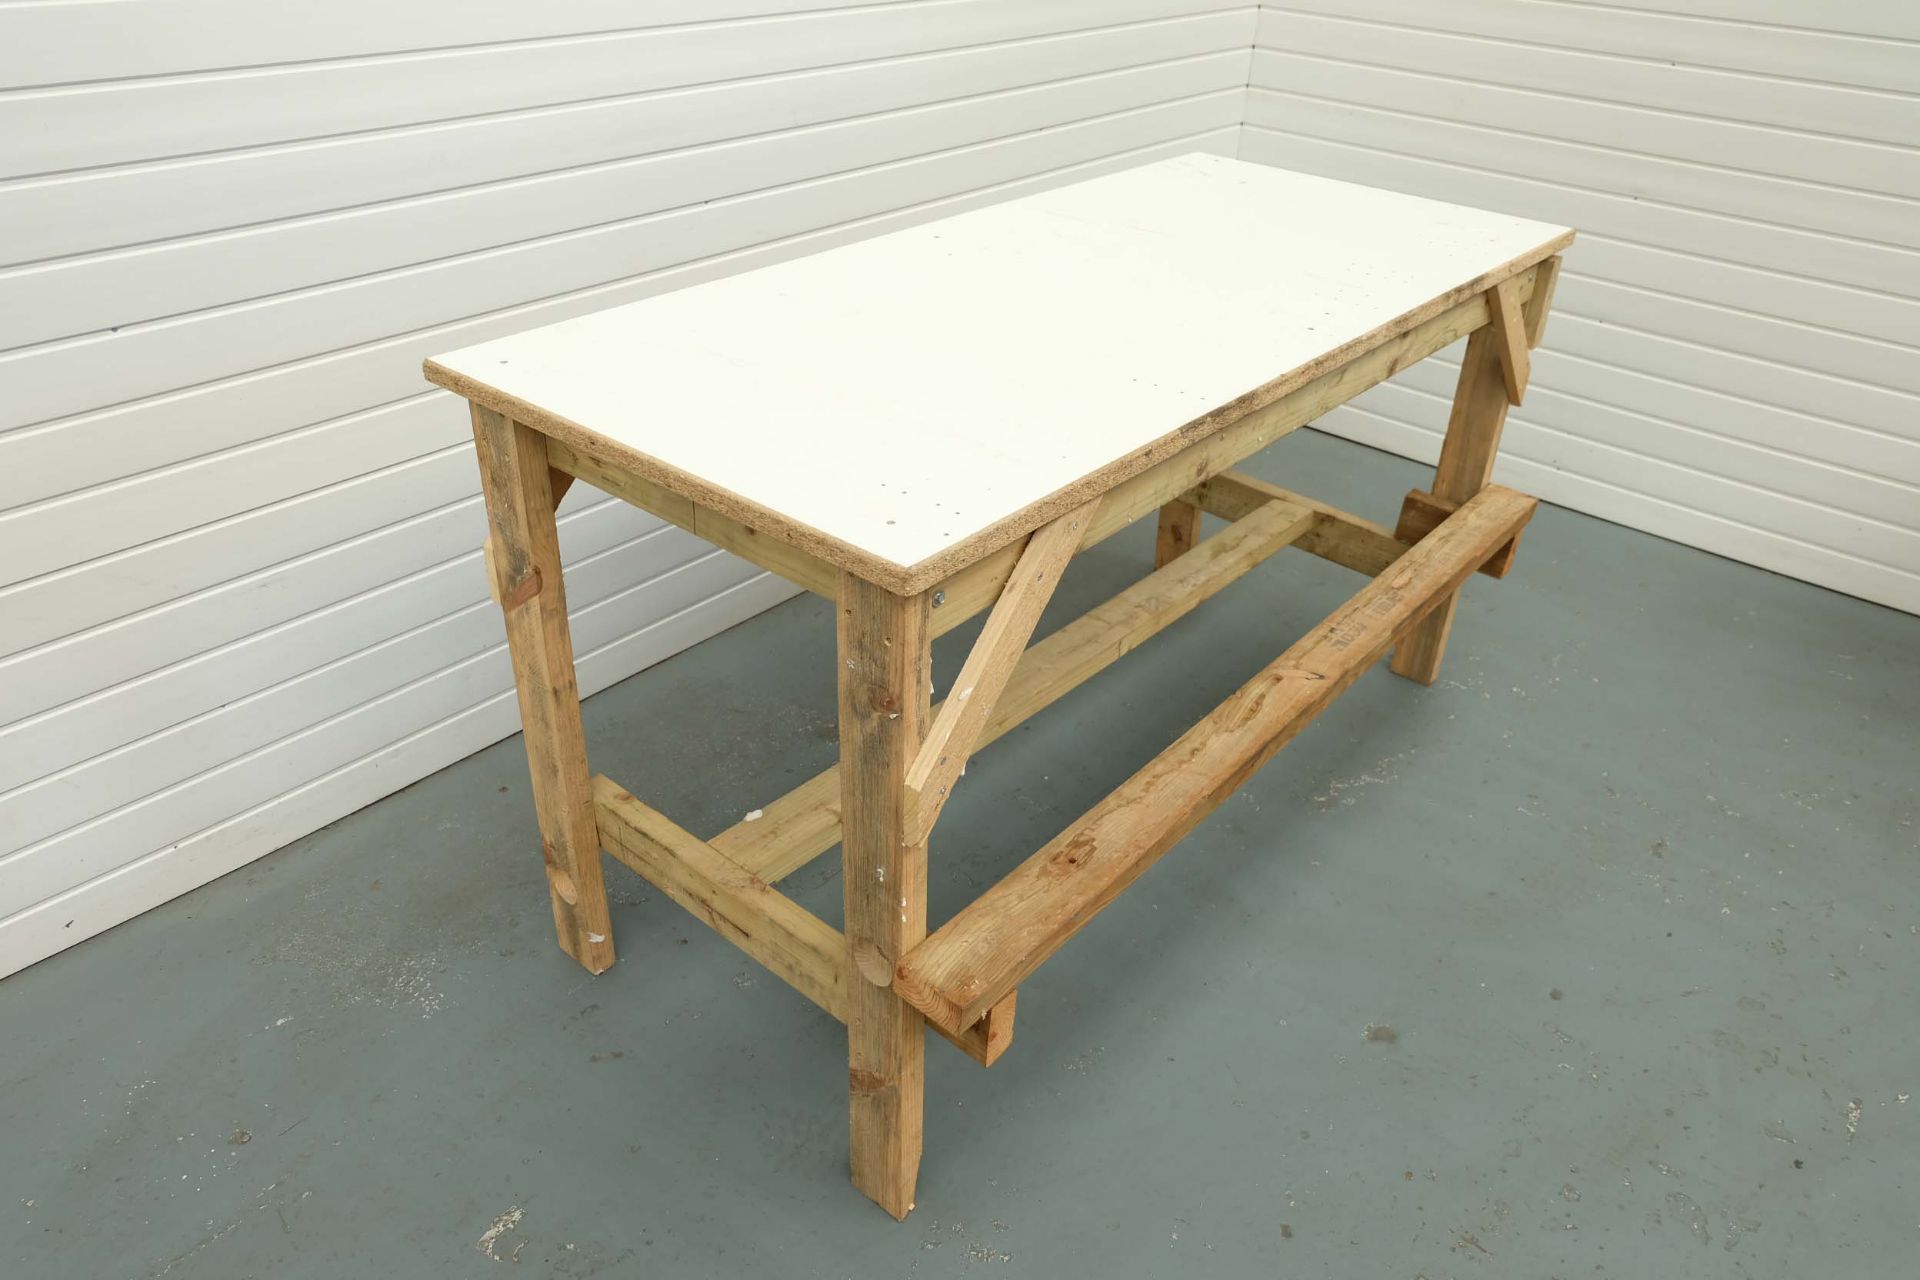 Timber Work Bench. Size 68" x 30" - Image 2 of 4